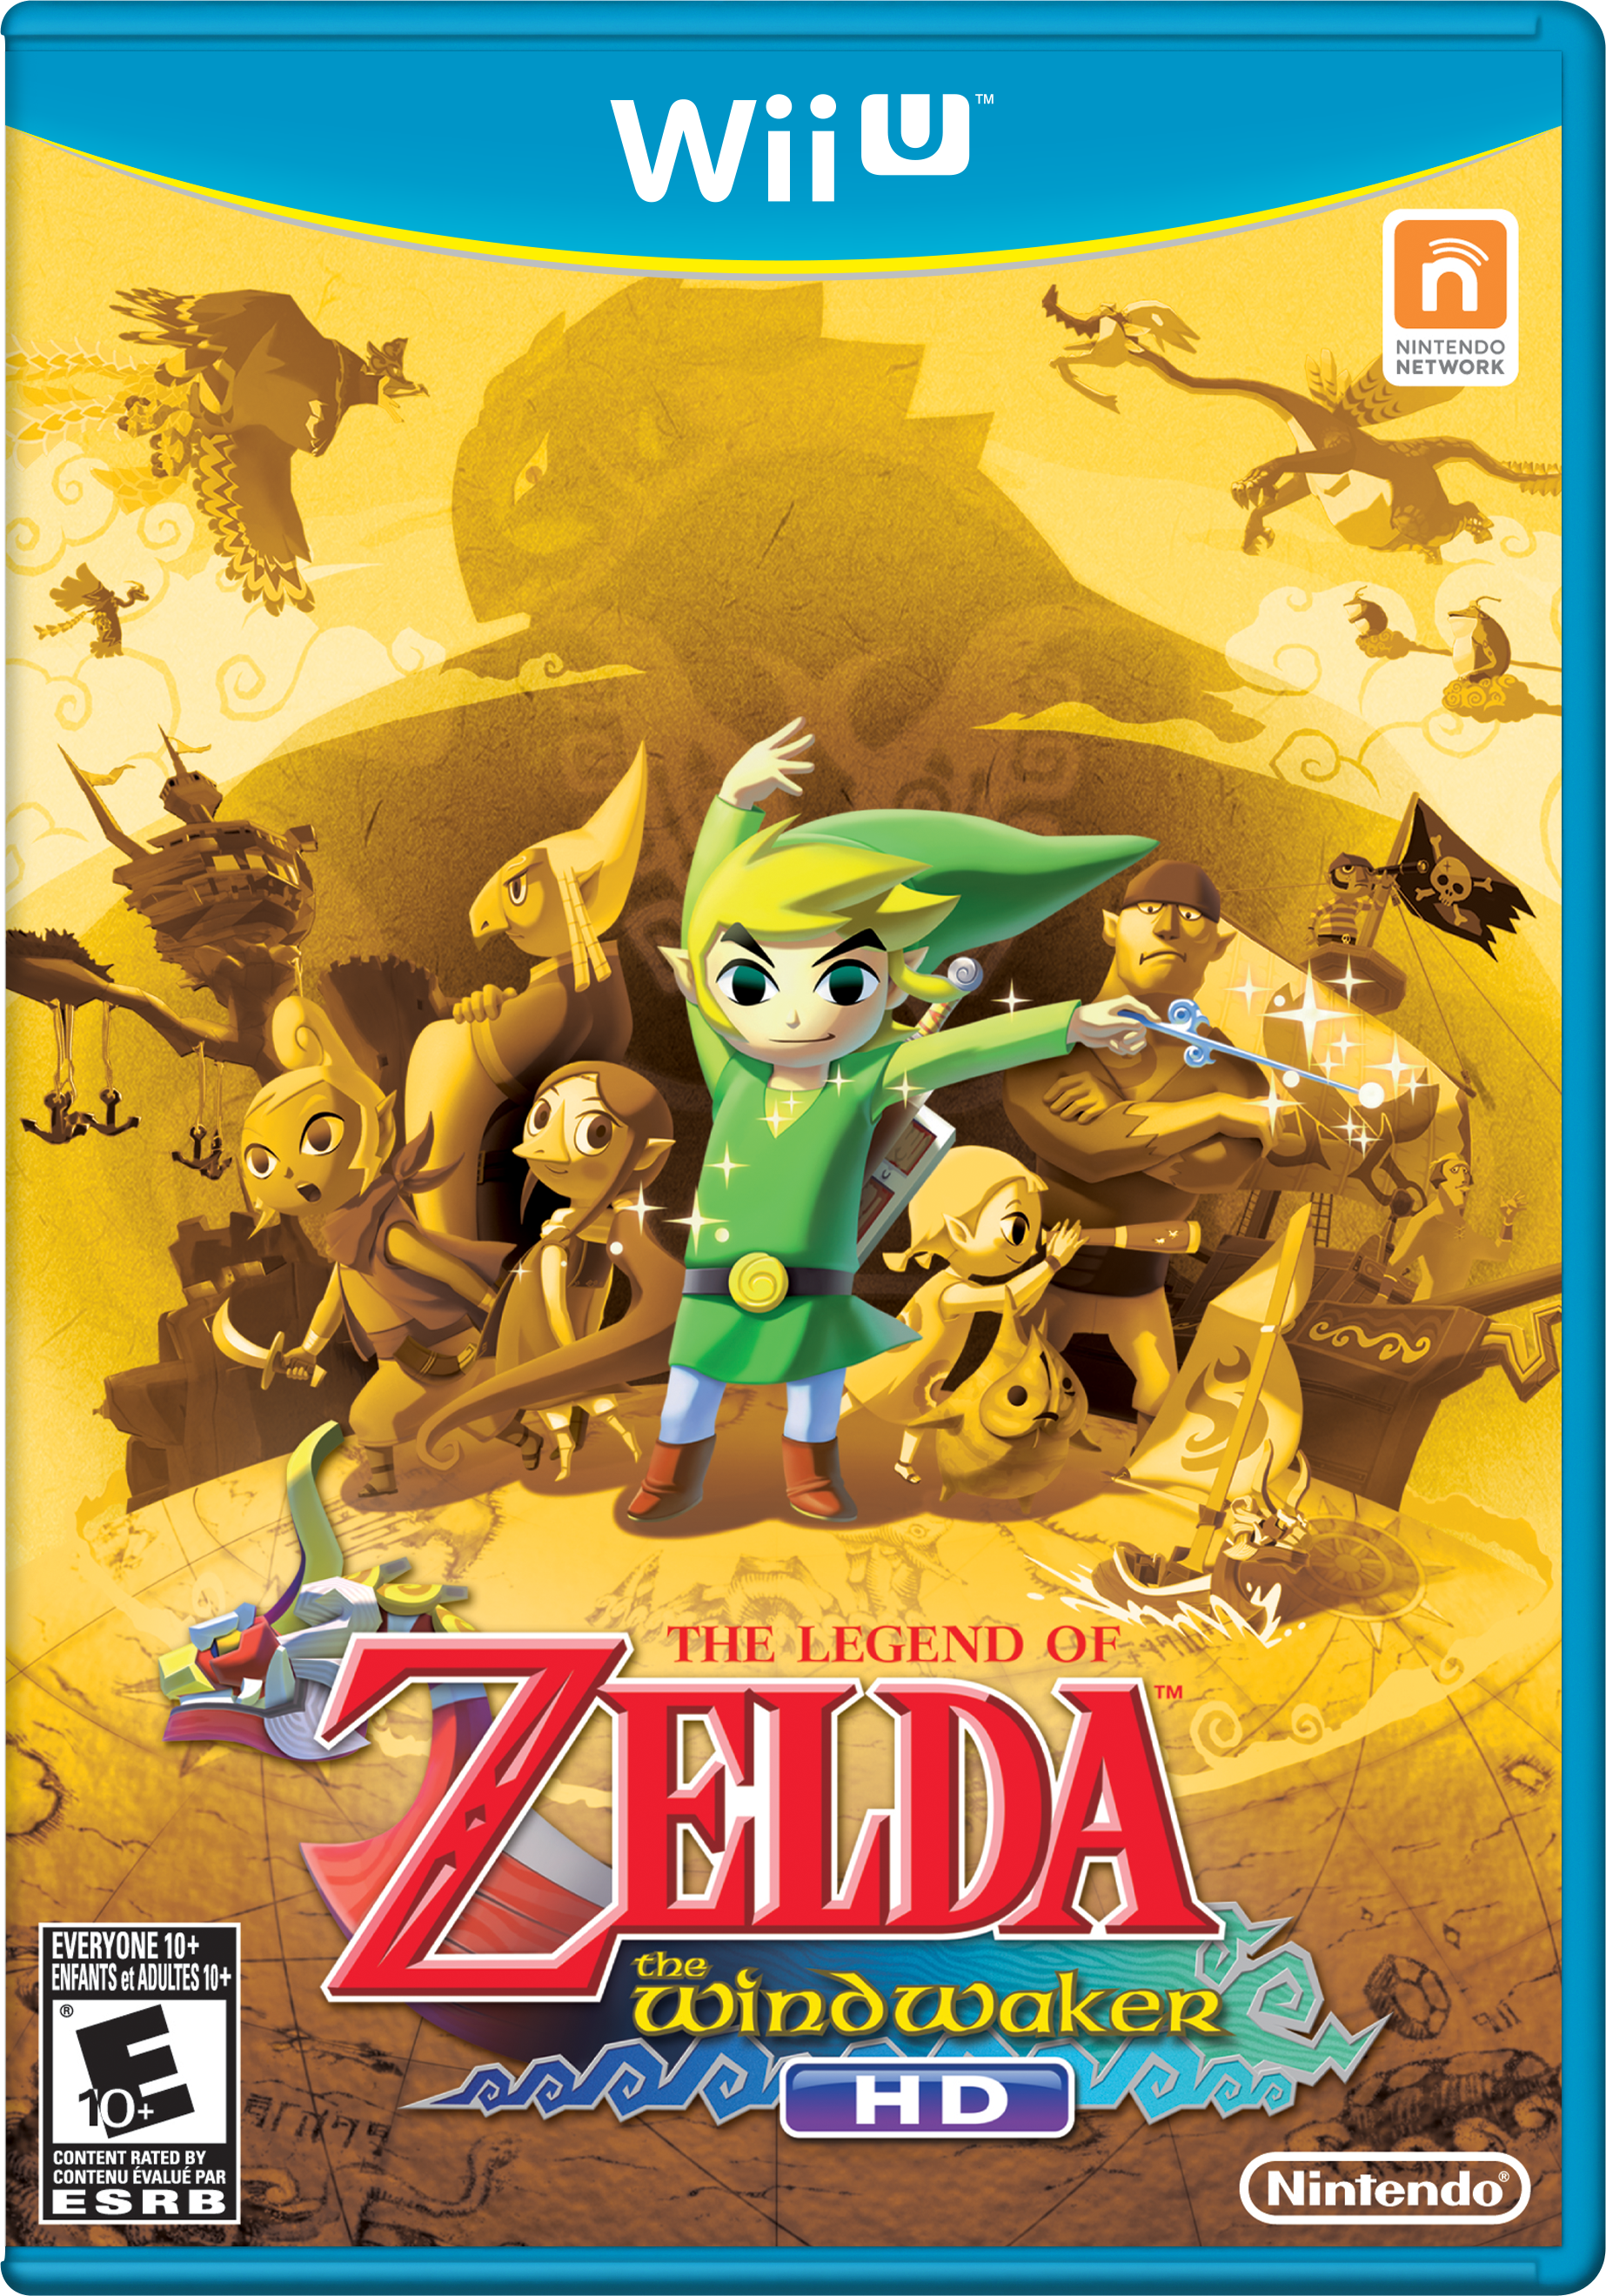 Amazing The Legend Of Zelda: The Wind Waker Pictures & Backgrounds